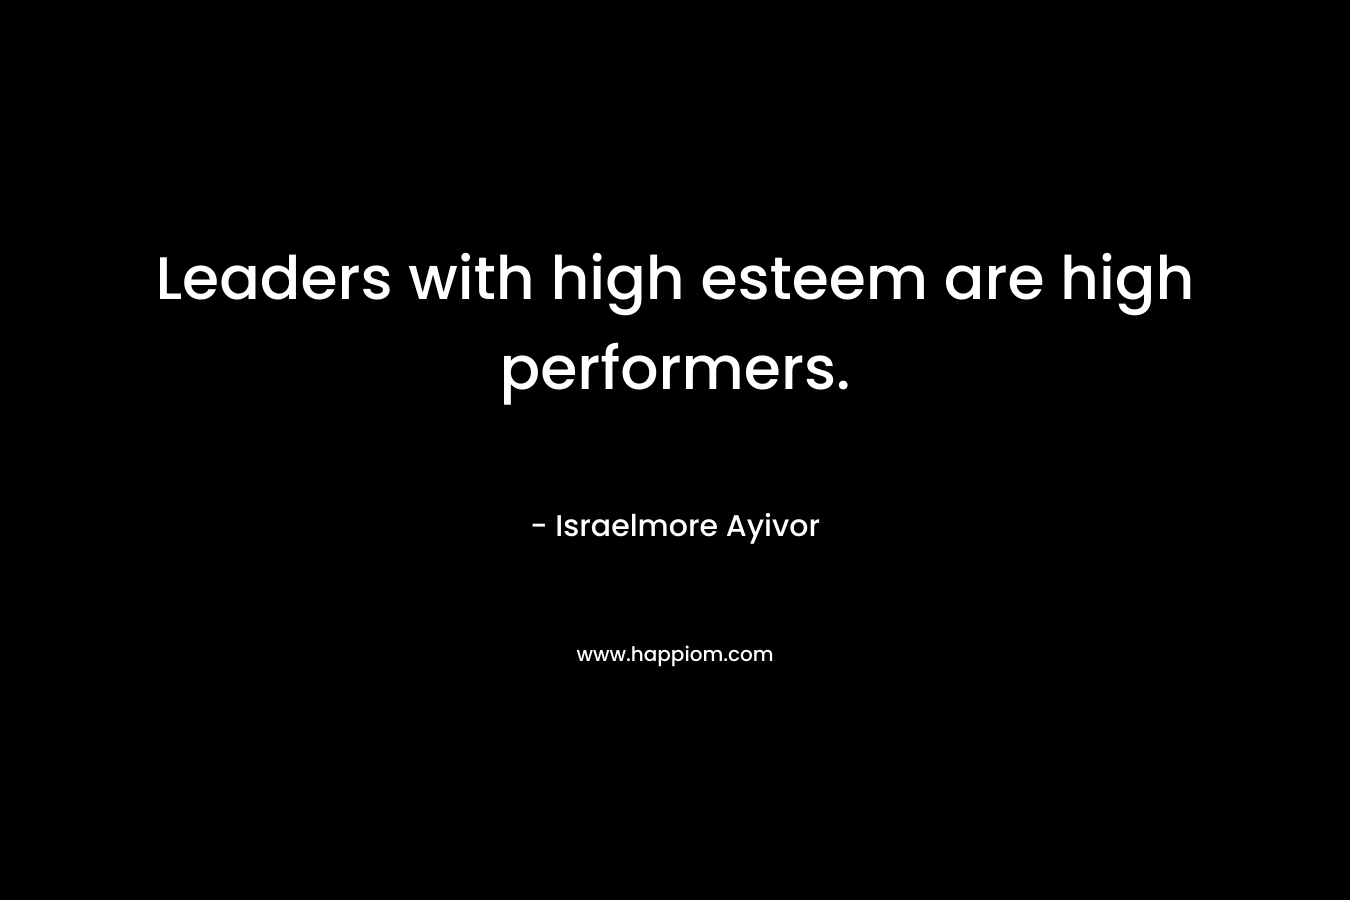 Leaders with high esteem are high performers. – Israelmore Ayivor